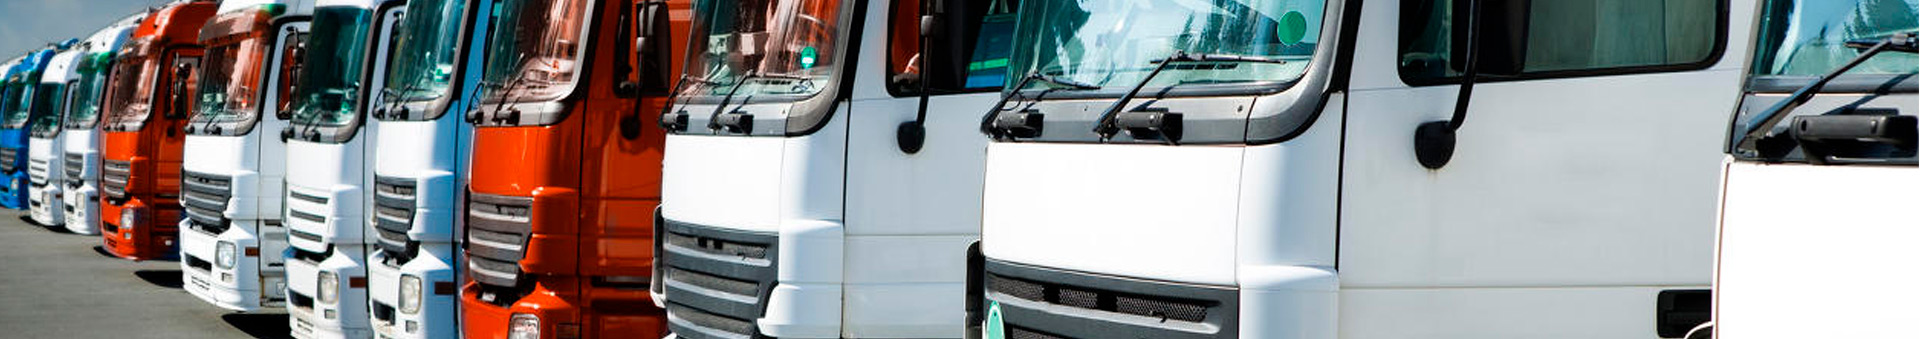 How much does it cost to install a tachograph on a truck?